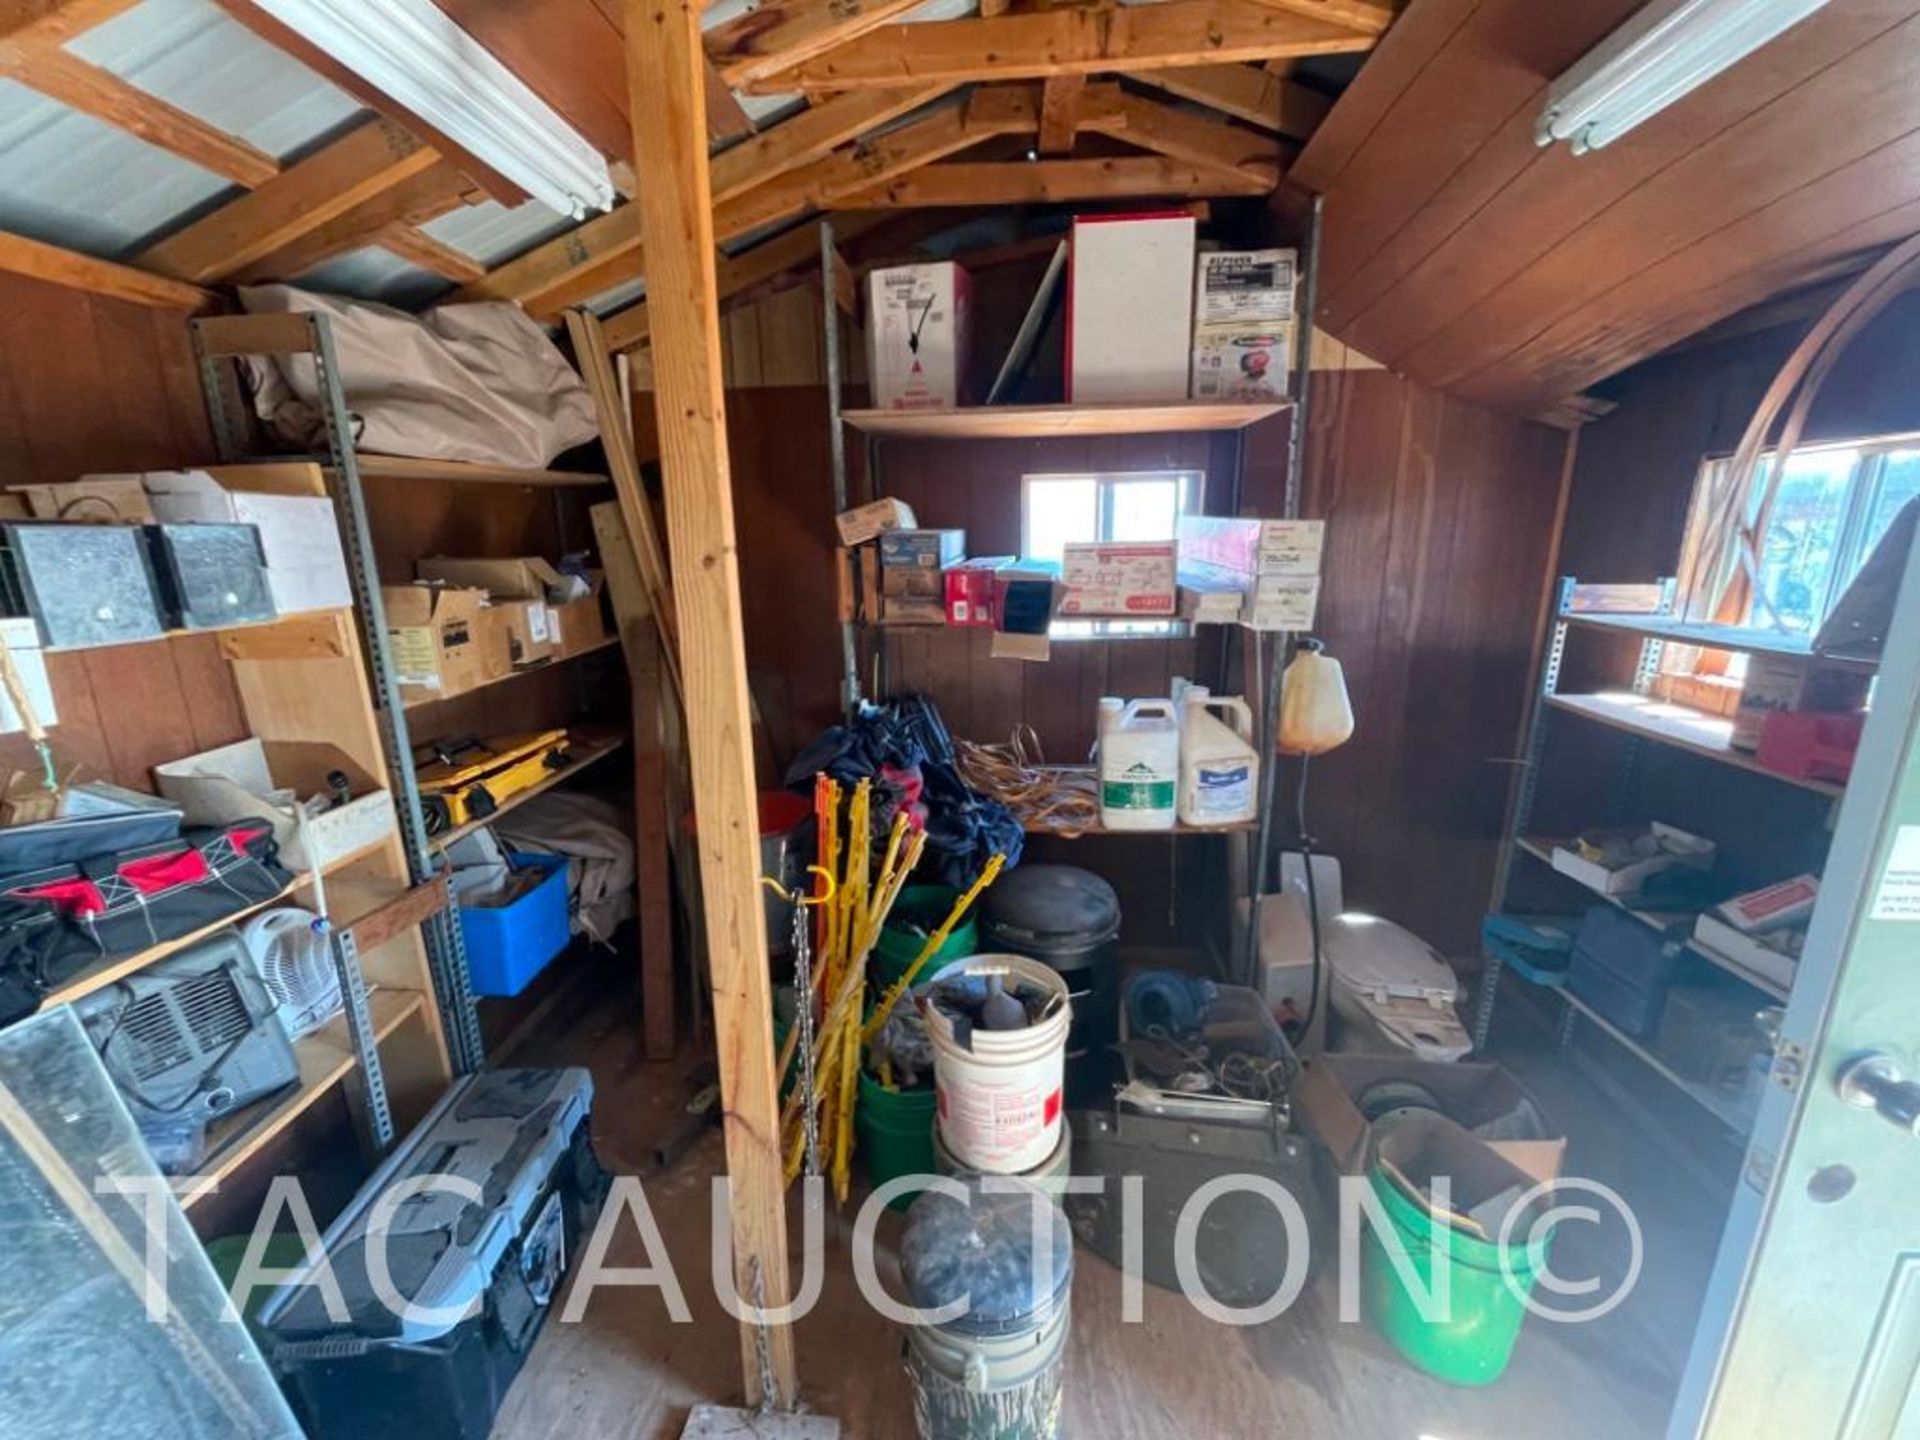 Storage Shed And Contents - Image 11 of 16